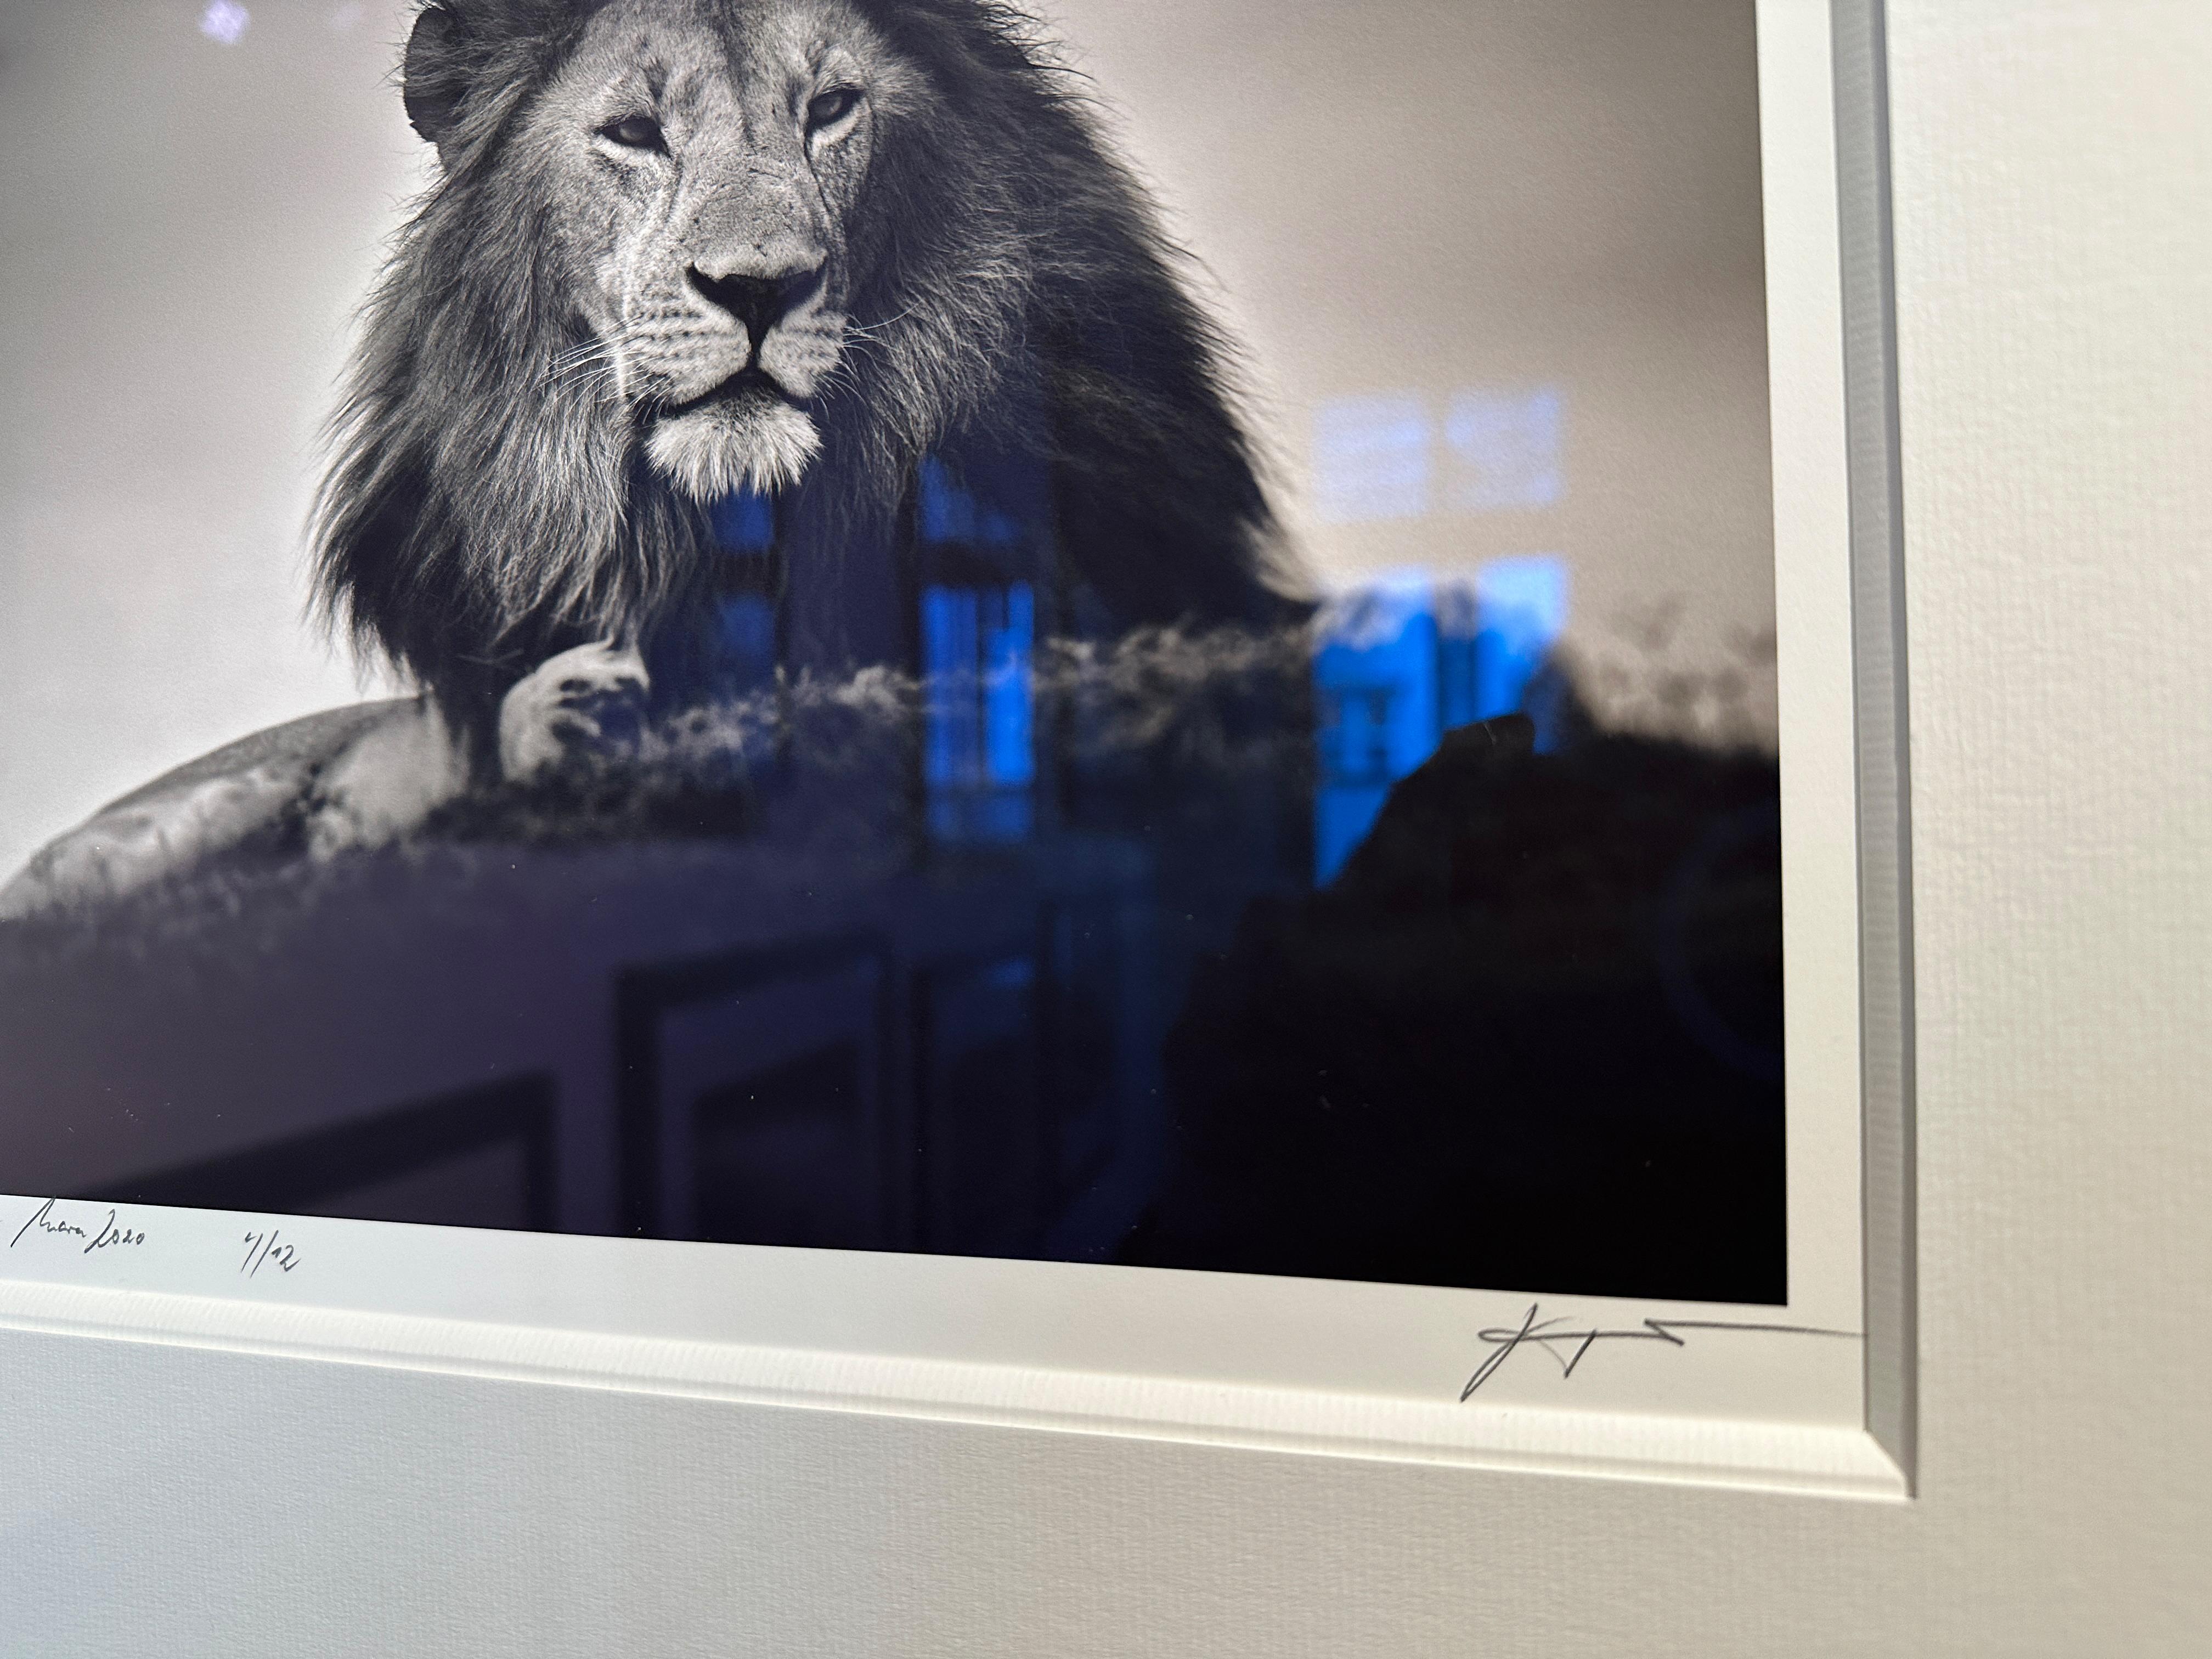 Edition No. 4/12
image size 28 x 28 cm
signed and numbered
Framed with mat and anti-reflex glass

Portrait of a male Lion in Kenya, Masai Mara.

Joachim Schmeisser is represented by leading Galleries worldwide. His photographs are among the most